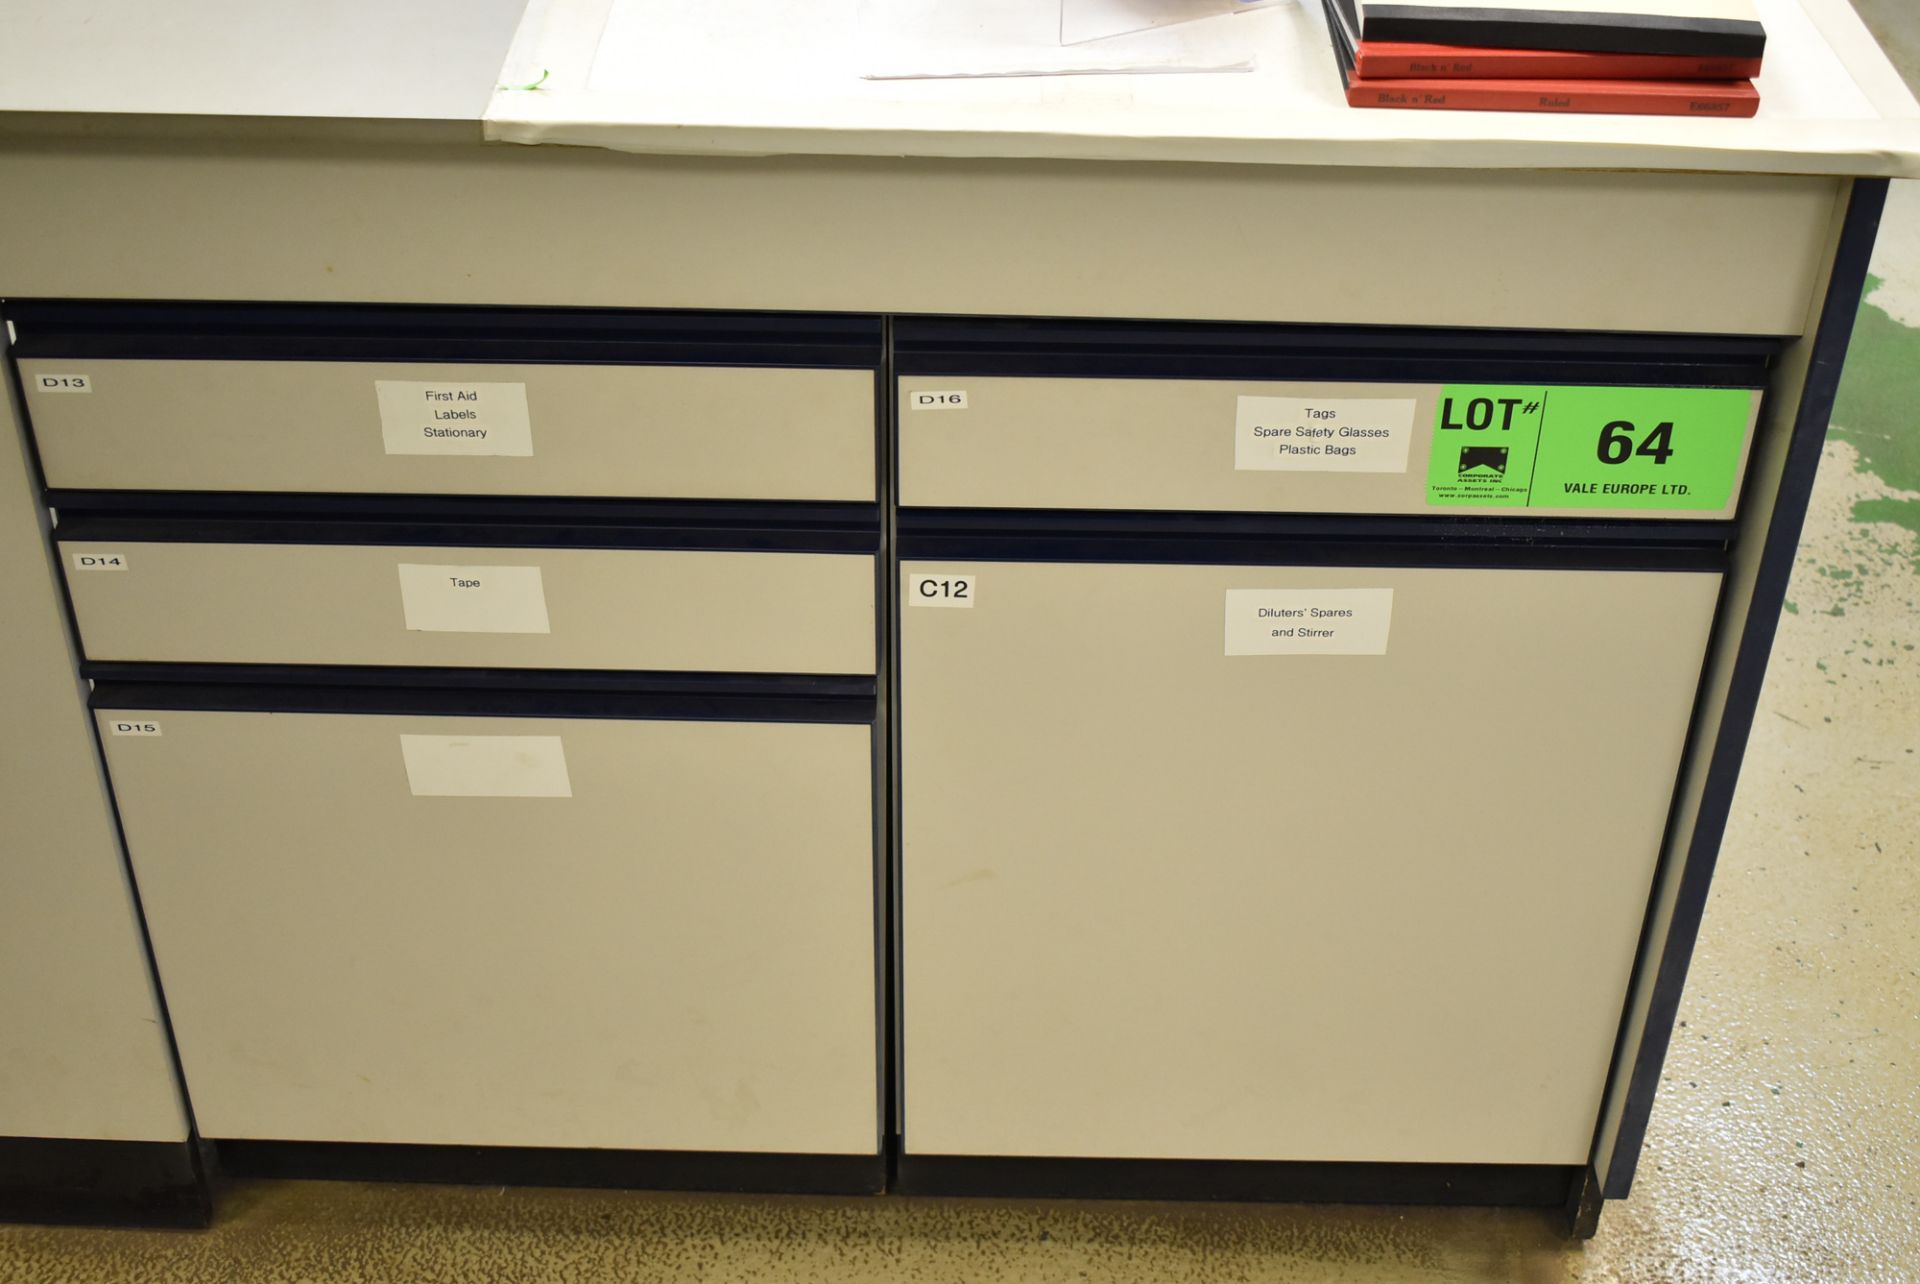 LOT/ 2 SECTION LAB STORAGE CABINET WITH CONTENTS - DILUTERS SPARES, STIRRER, STATIONARY, PLASTIC